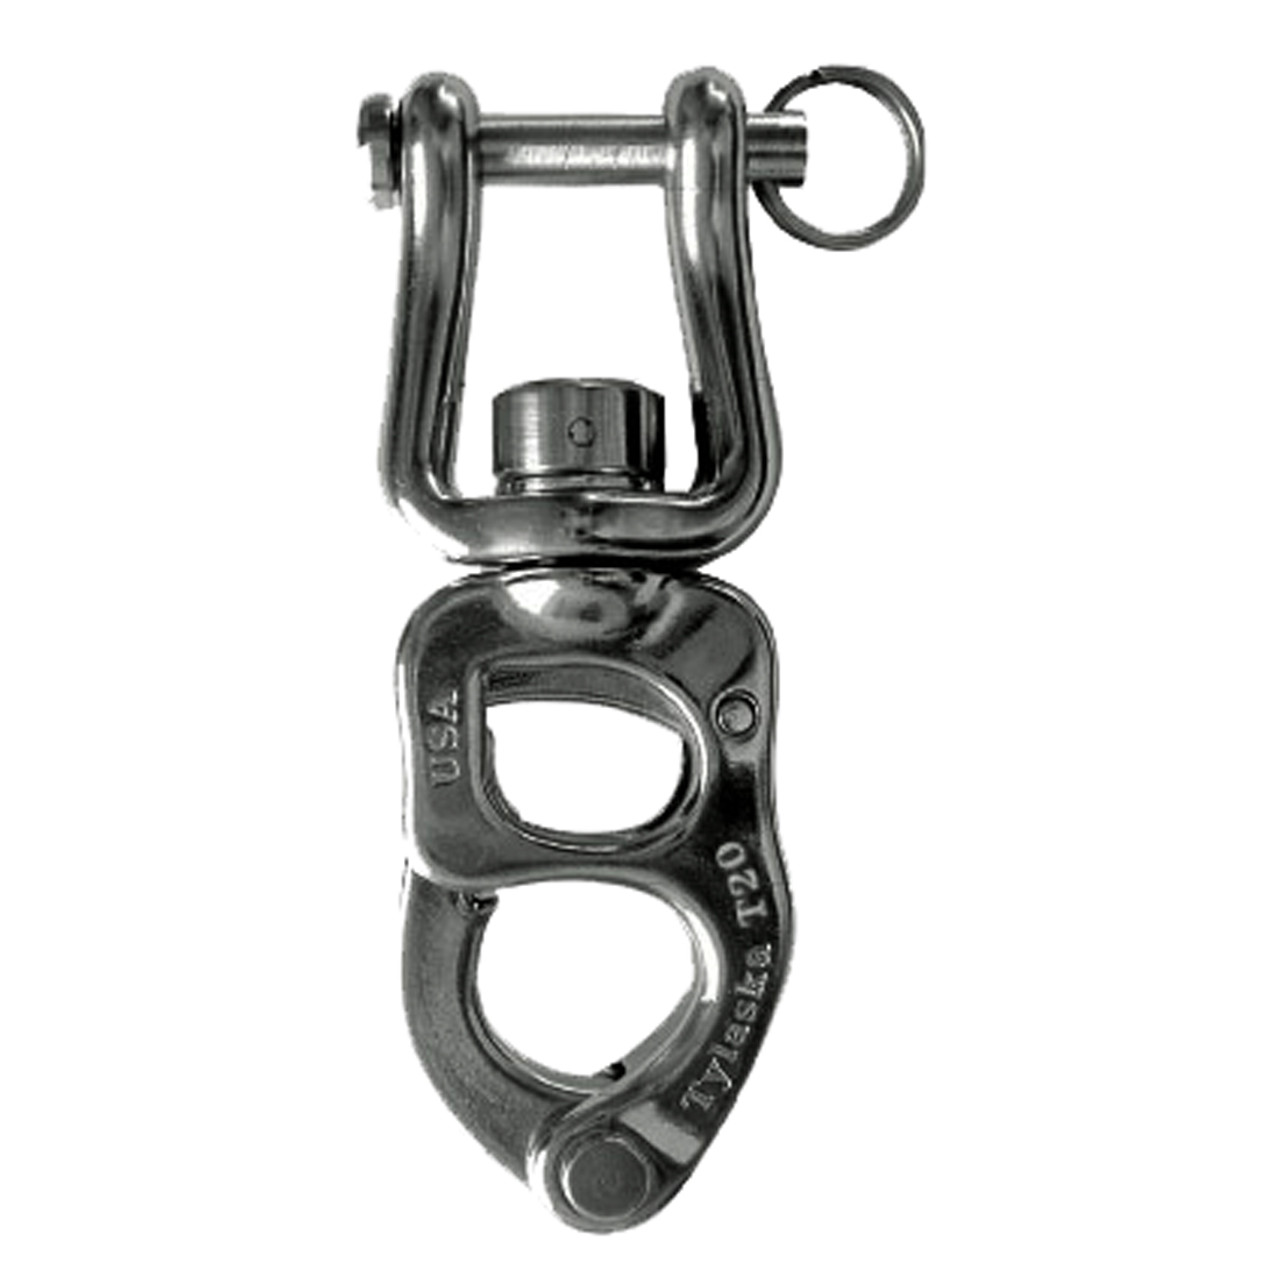 Tylaska Stainless Steel T20-C Quick-Release 'Clevis Bail' Snap Shackle